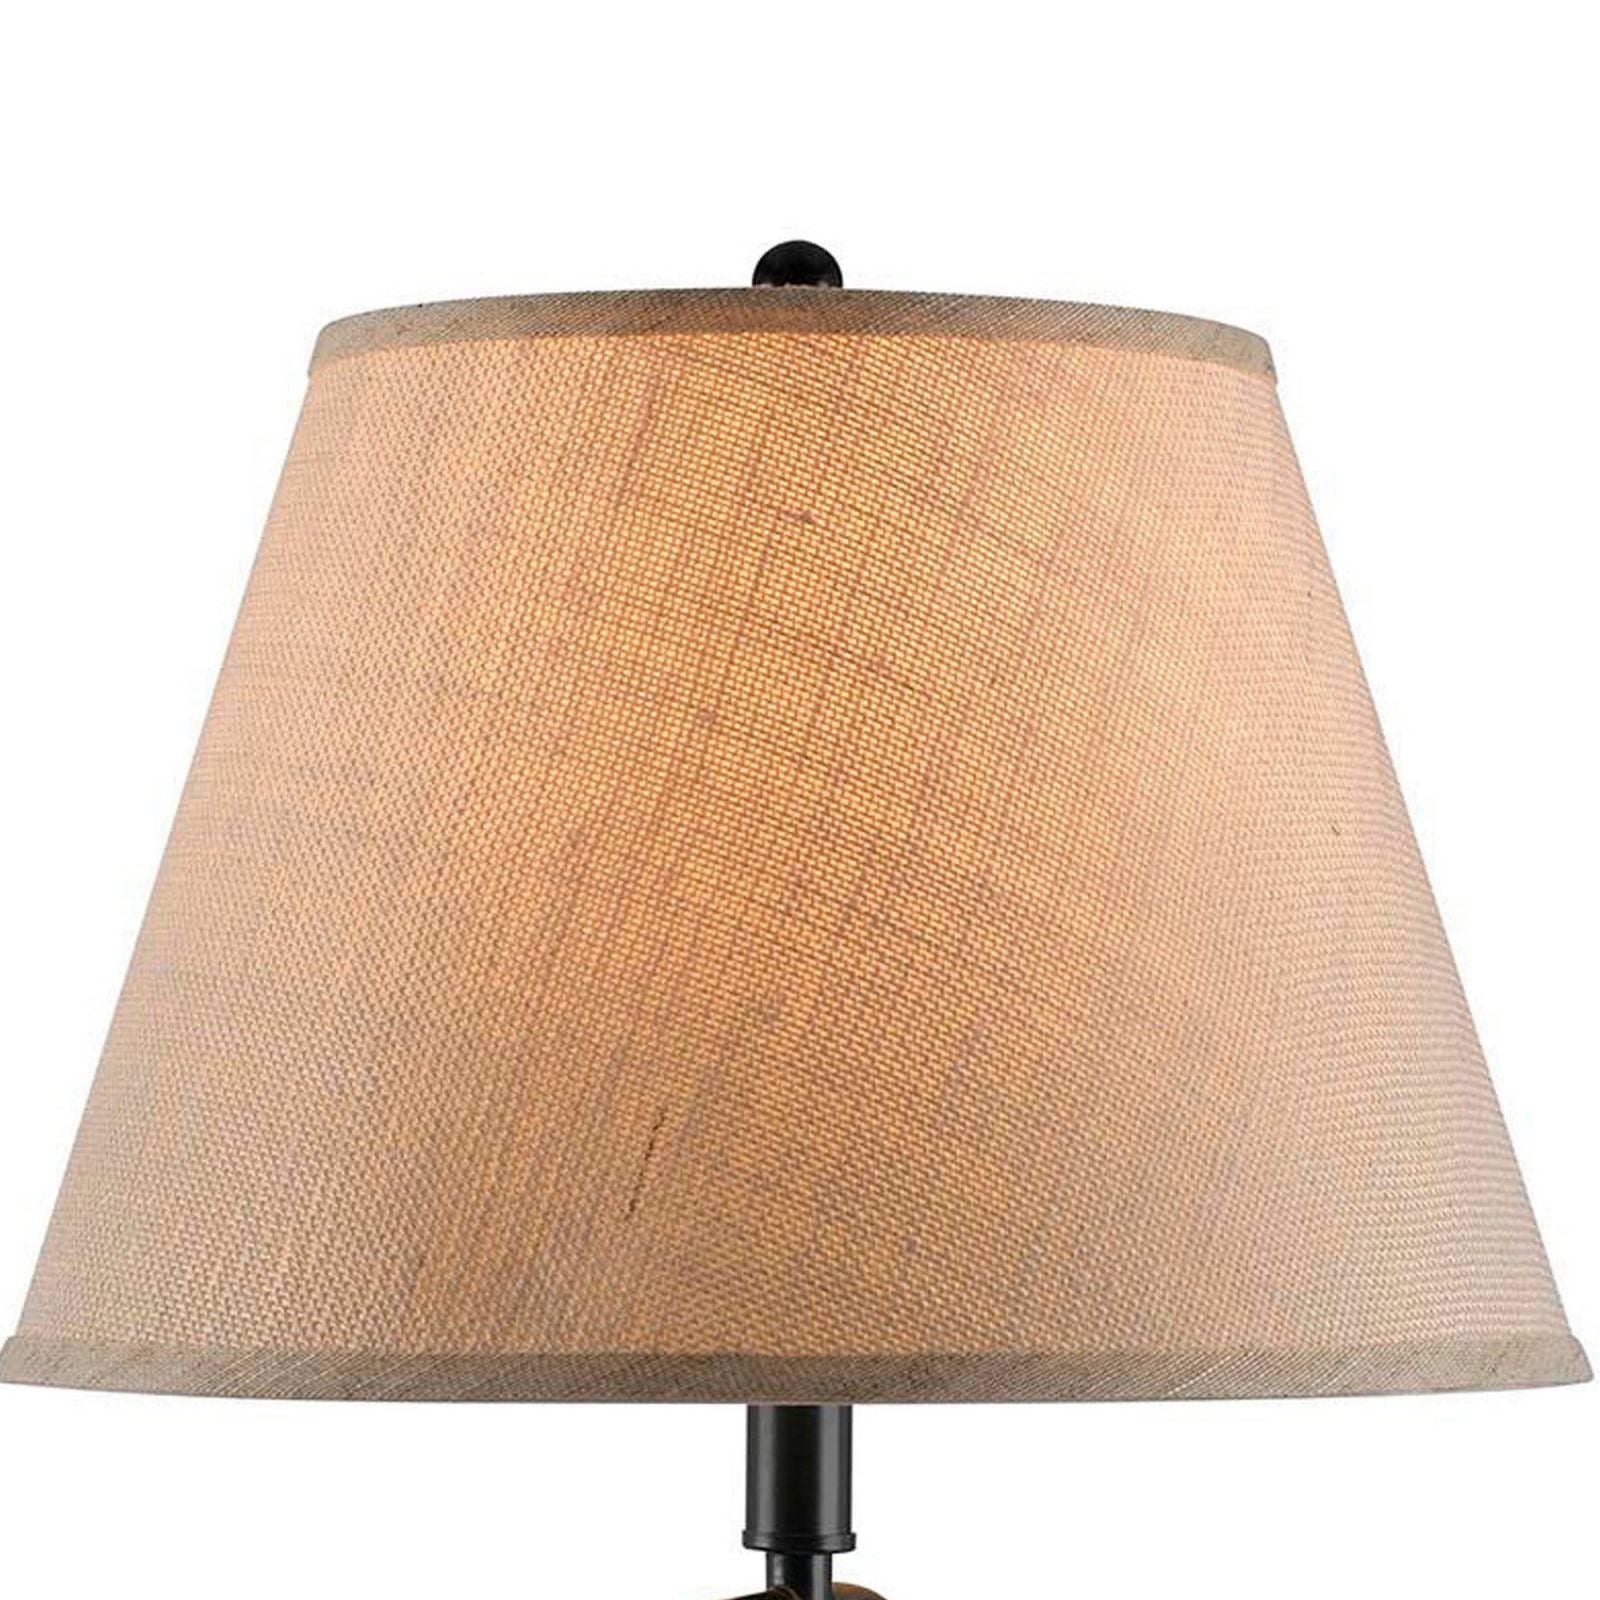 3 Way Metal Body Table Lamp With Swing Arm And Conical Fabric Shade, Black By Benzara